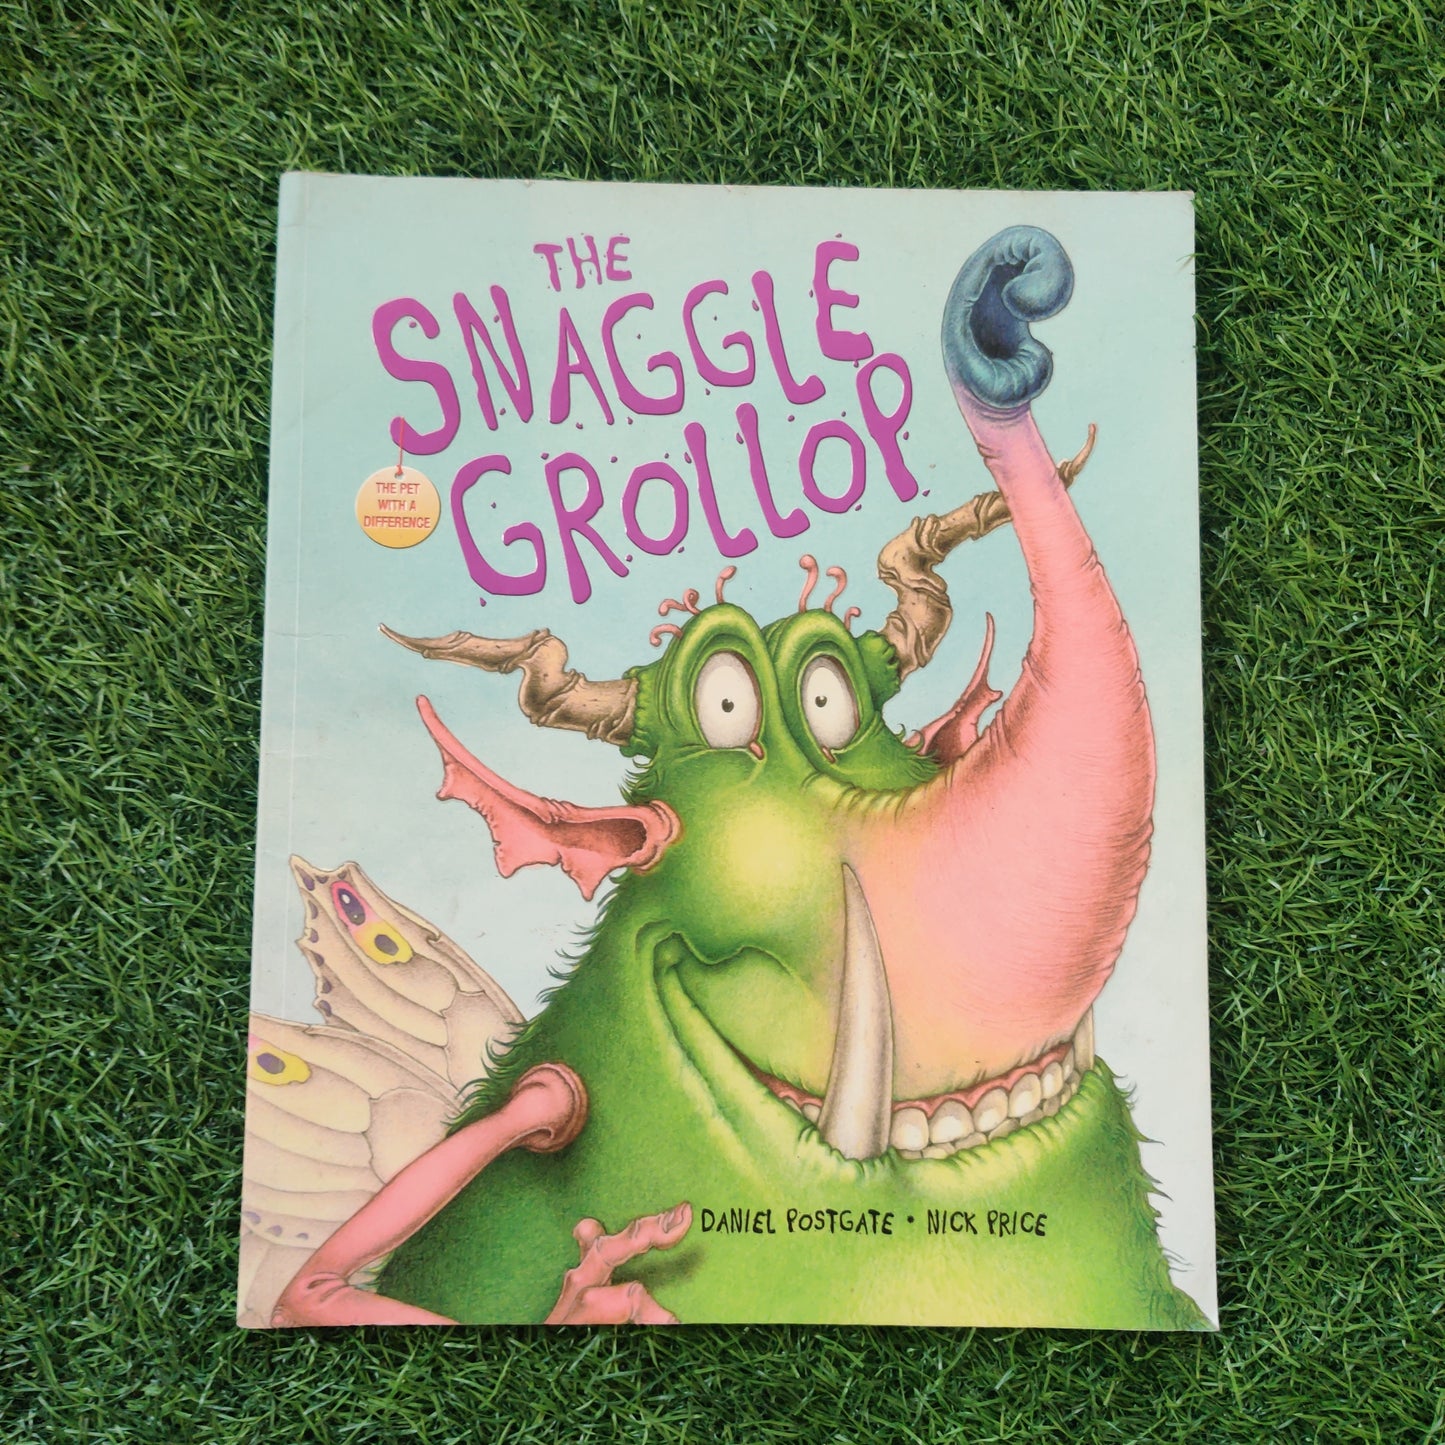 The Snaggle Grollop